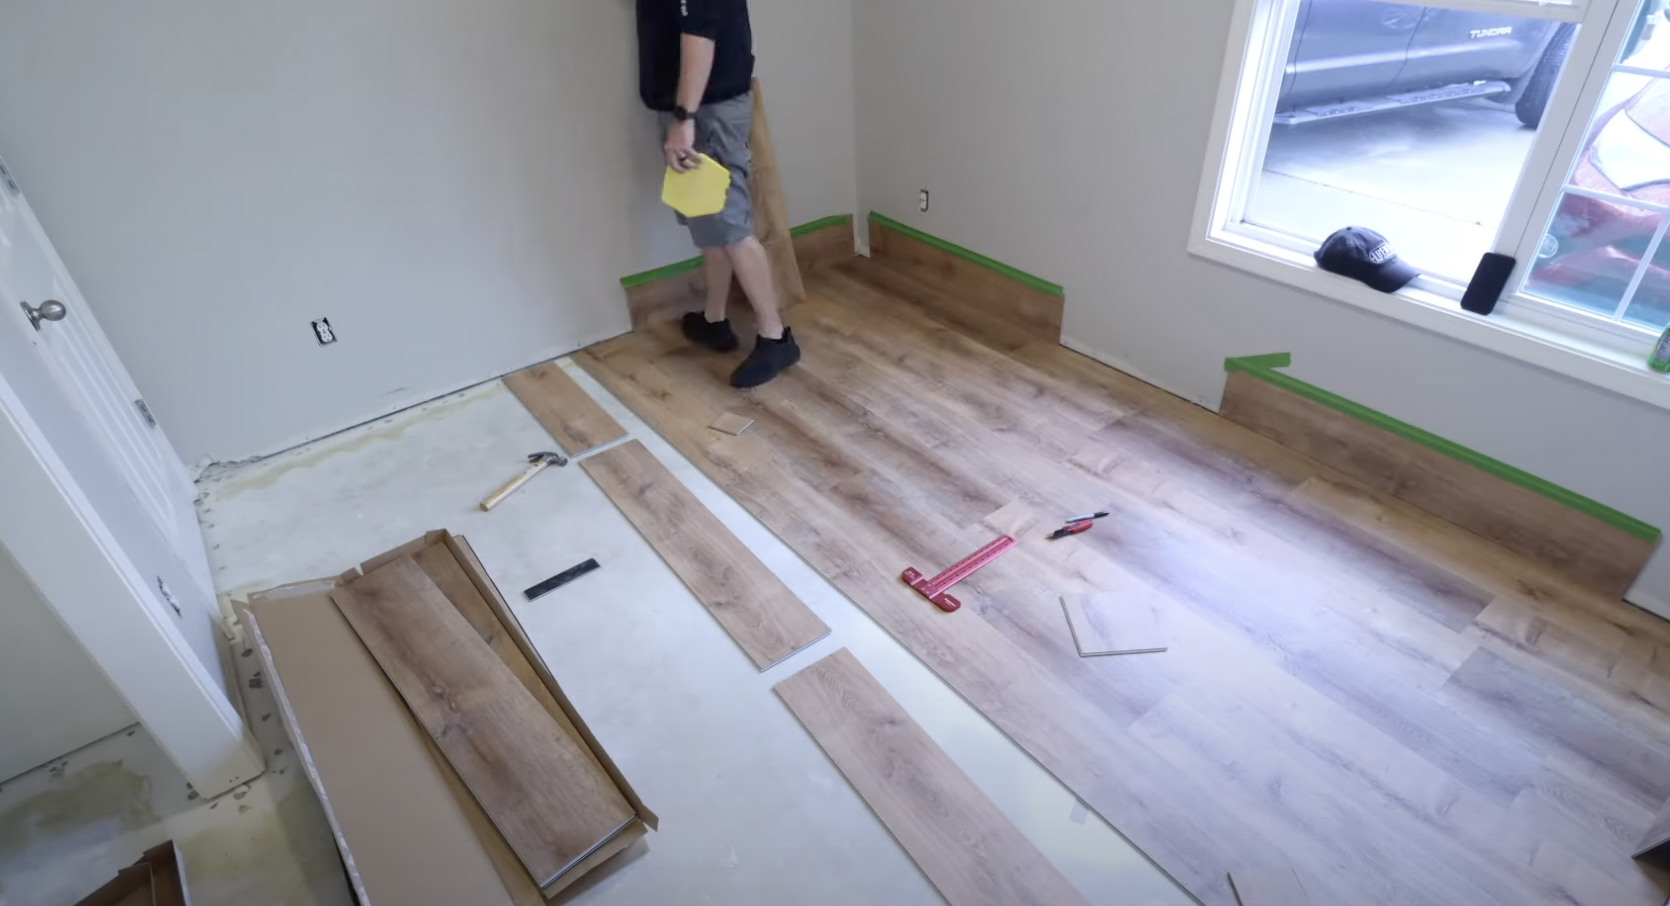 How To Install Lifeproof Vinyl Flooring How to Install Lifeproof Vinyl Flooring — Bent's Woodworking